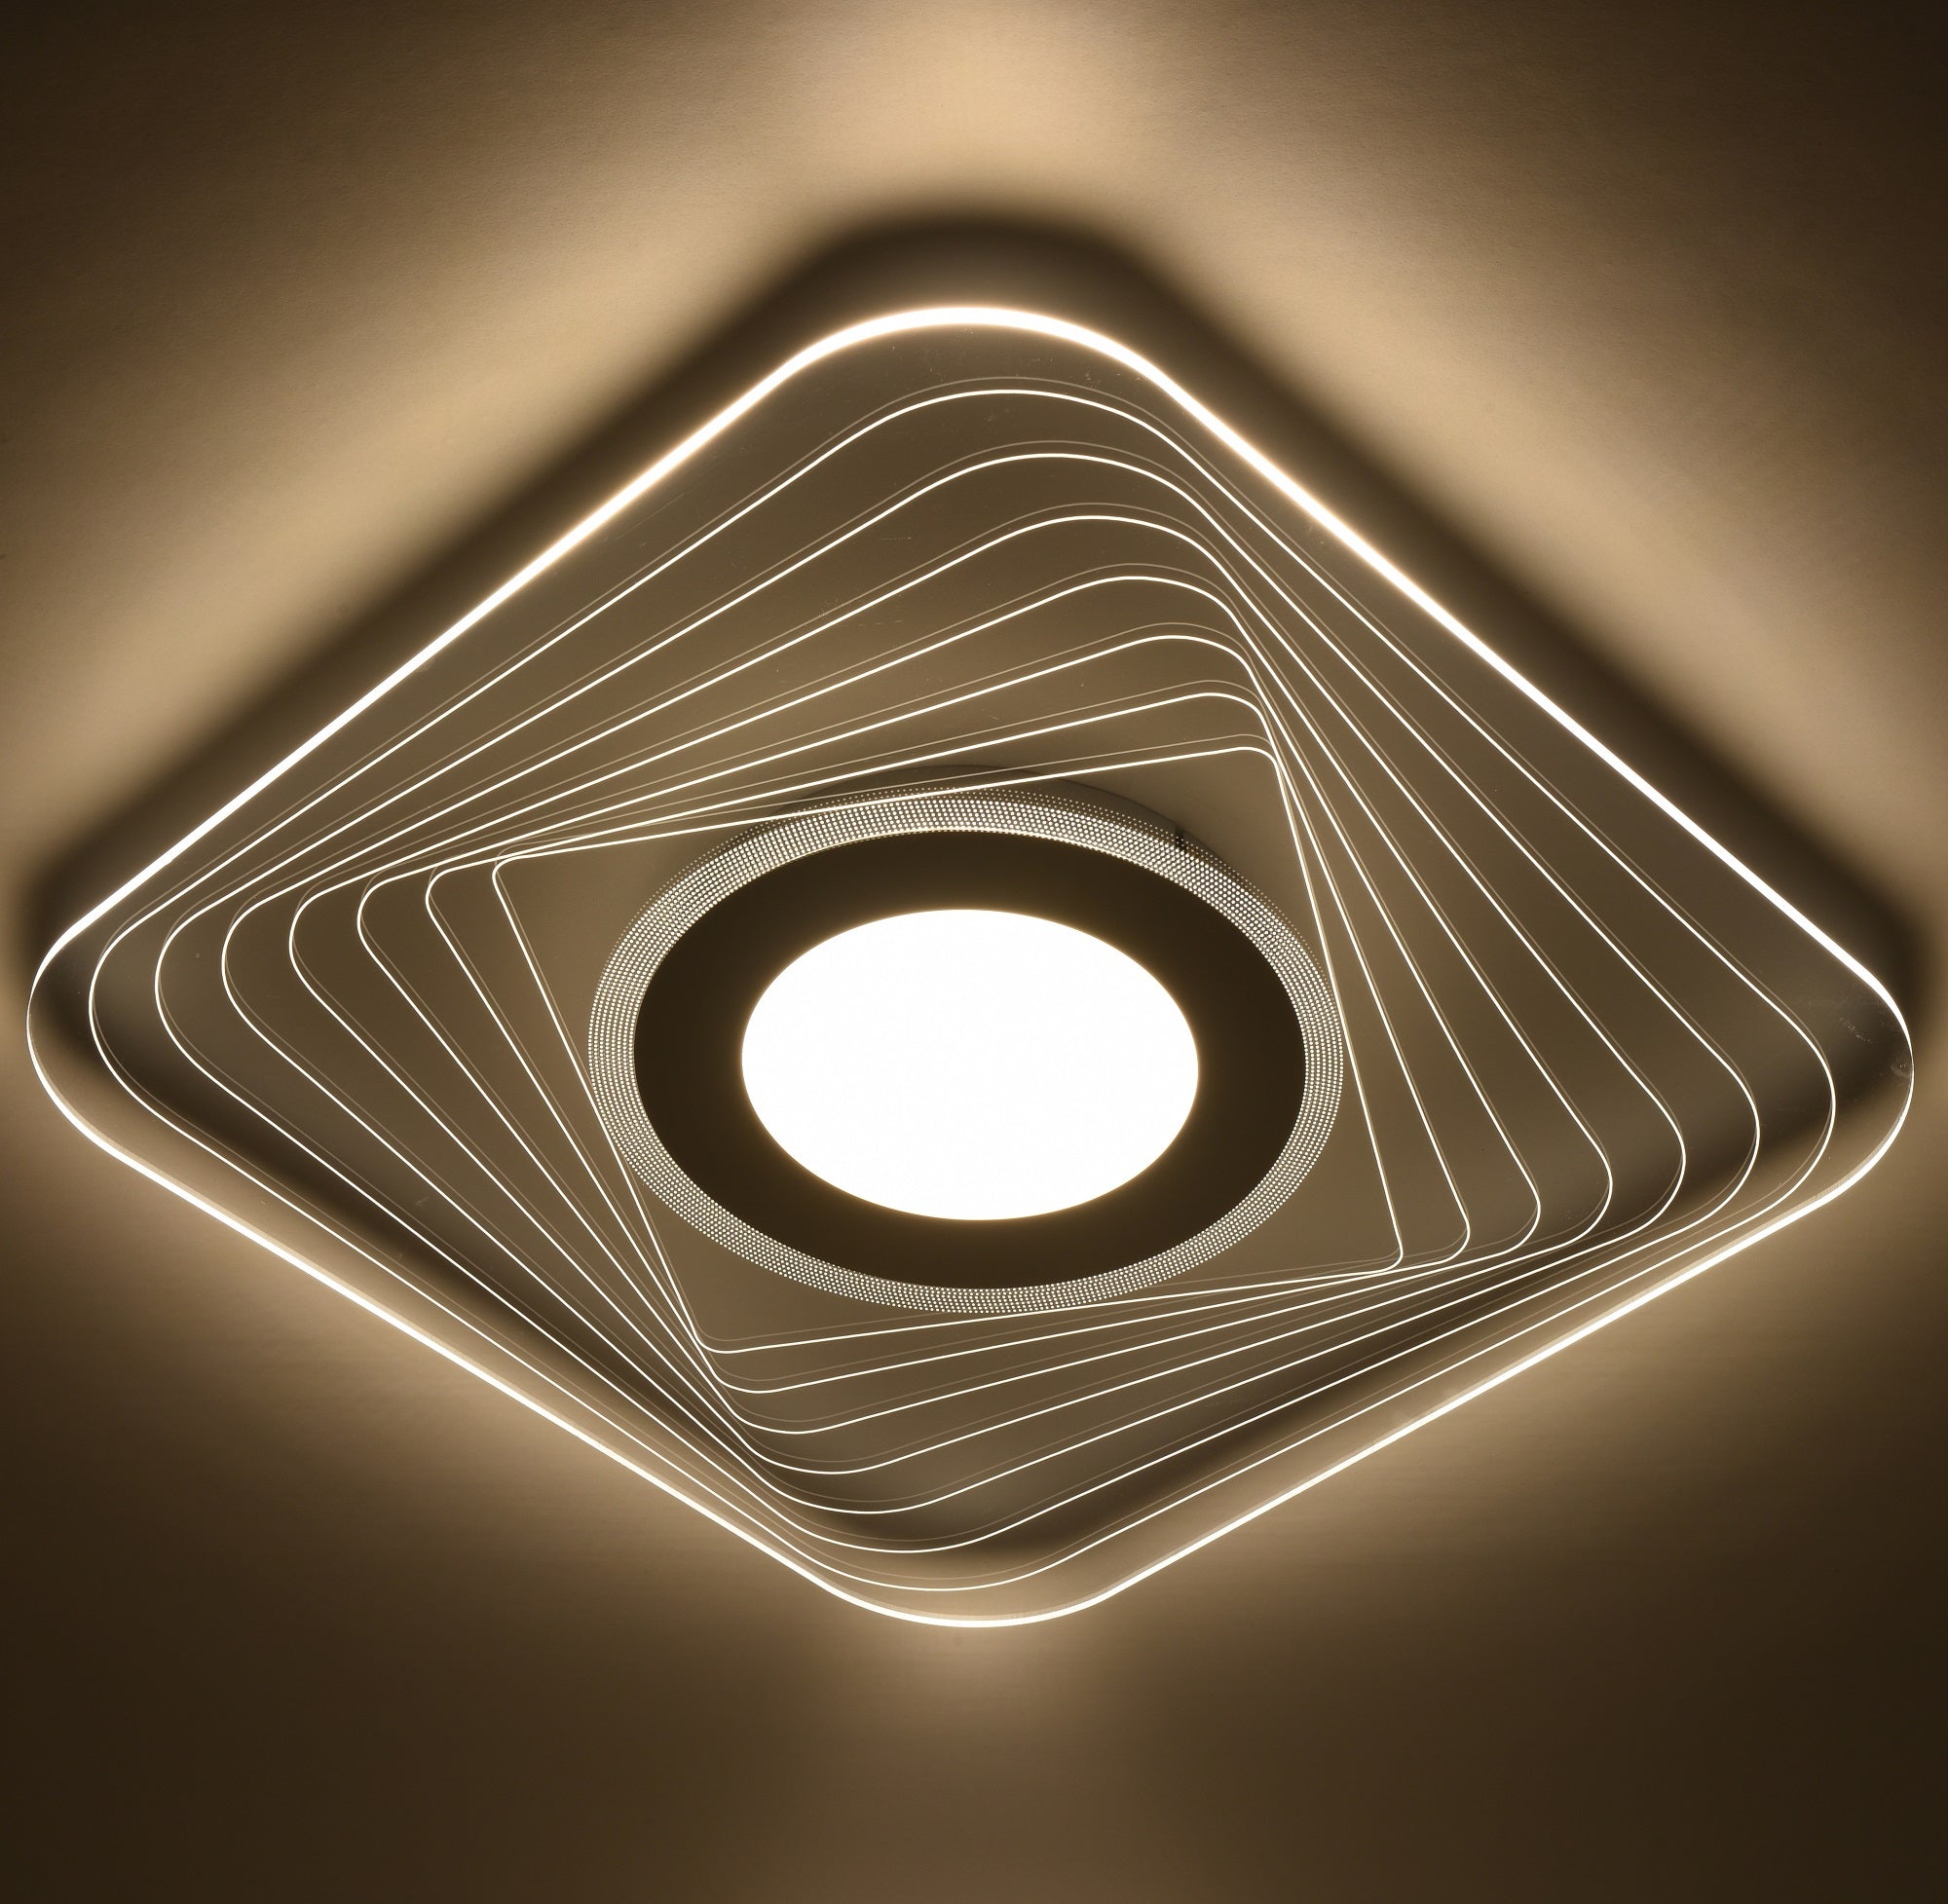 LED Ceiling Light, Square Acrylic Shade, Natural White (4000K), Non Dimmable